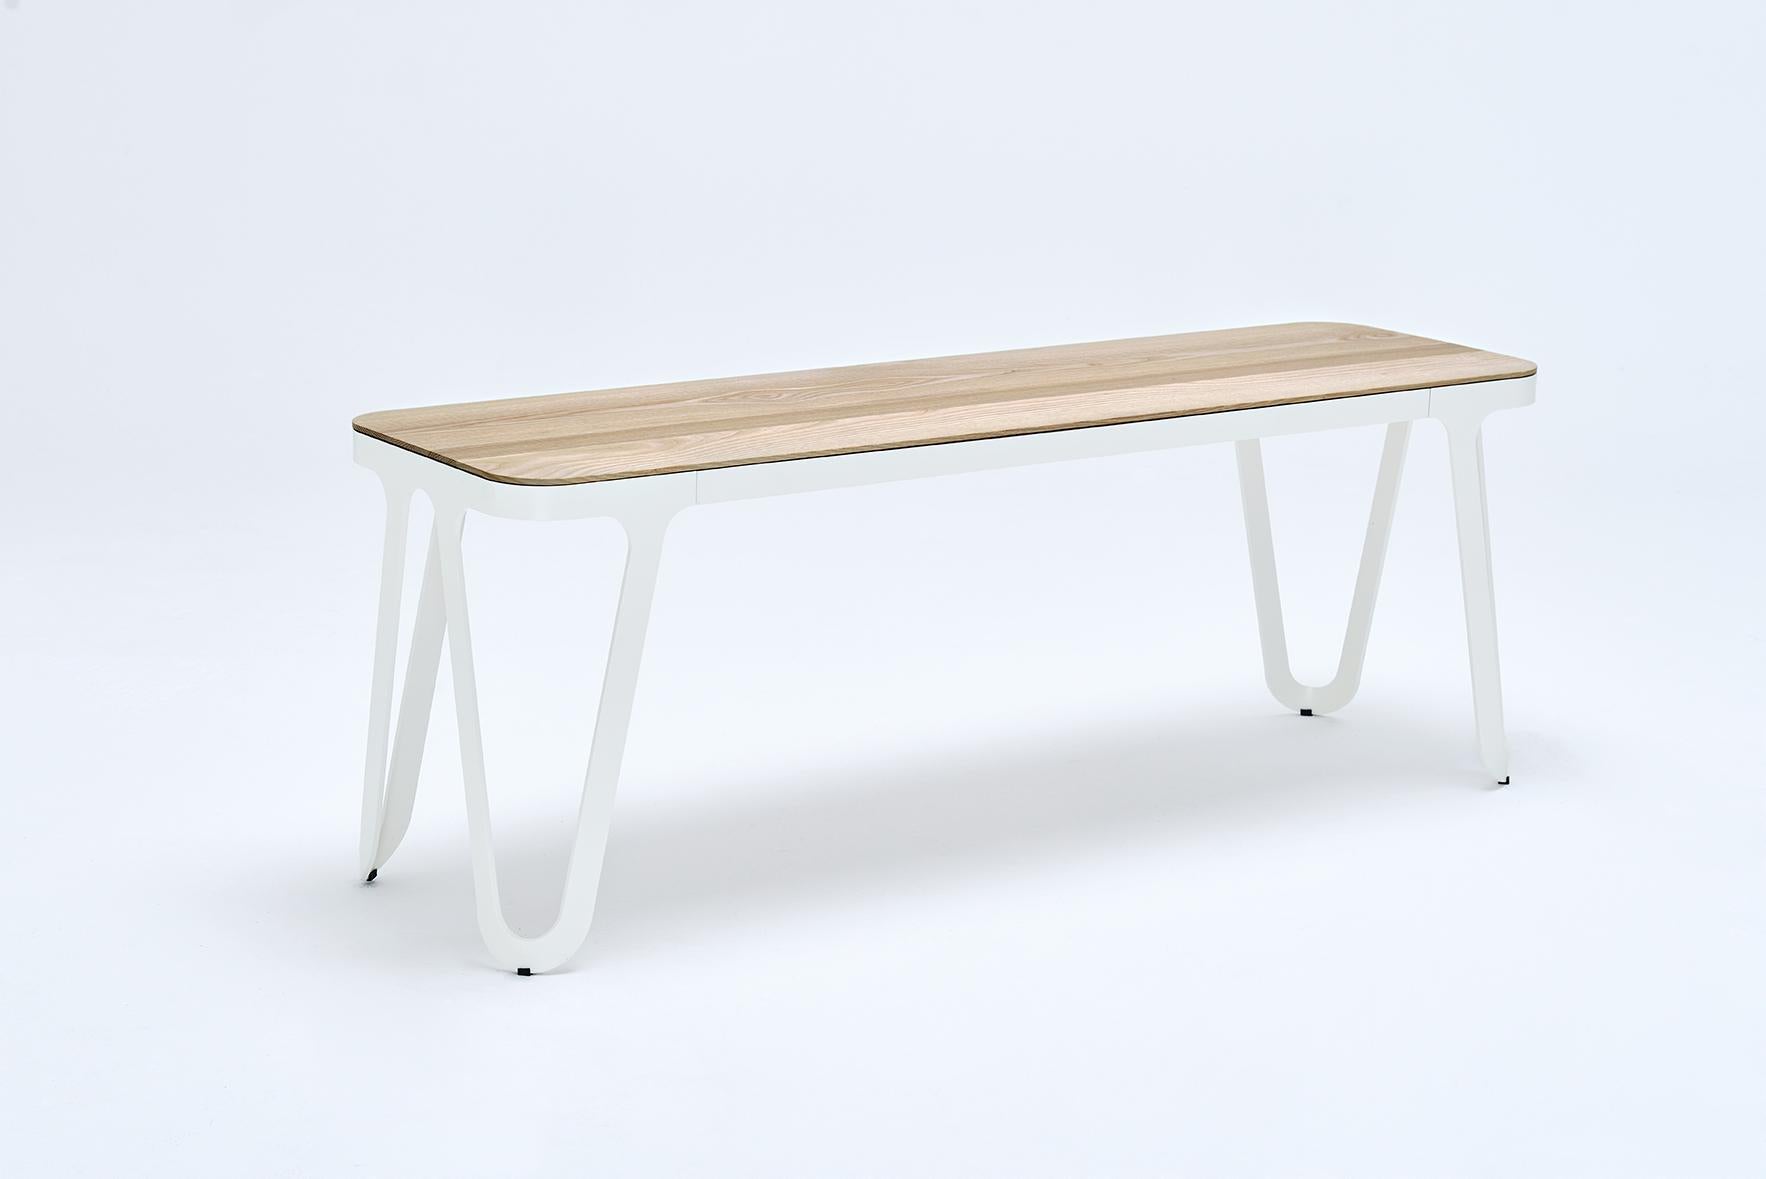 Loop bench 240 walnut by Sebastian Scherer
Material: Aluminium, walnut
Dimensions: D240x W38 x H45 cm.
Weight: 30.5 kg
Also available: Colours: solid wood (matt lacquered): black and white stained ash / natural oak / american walnut
frame